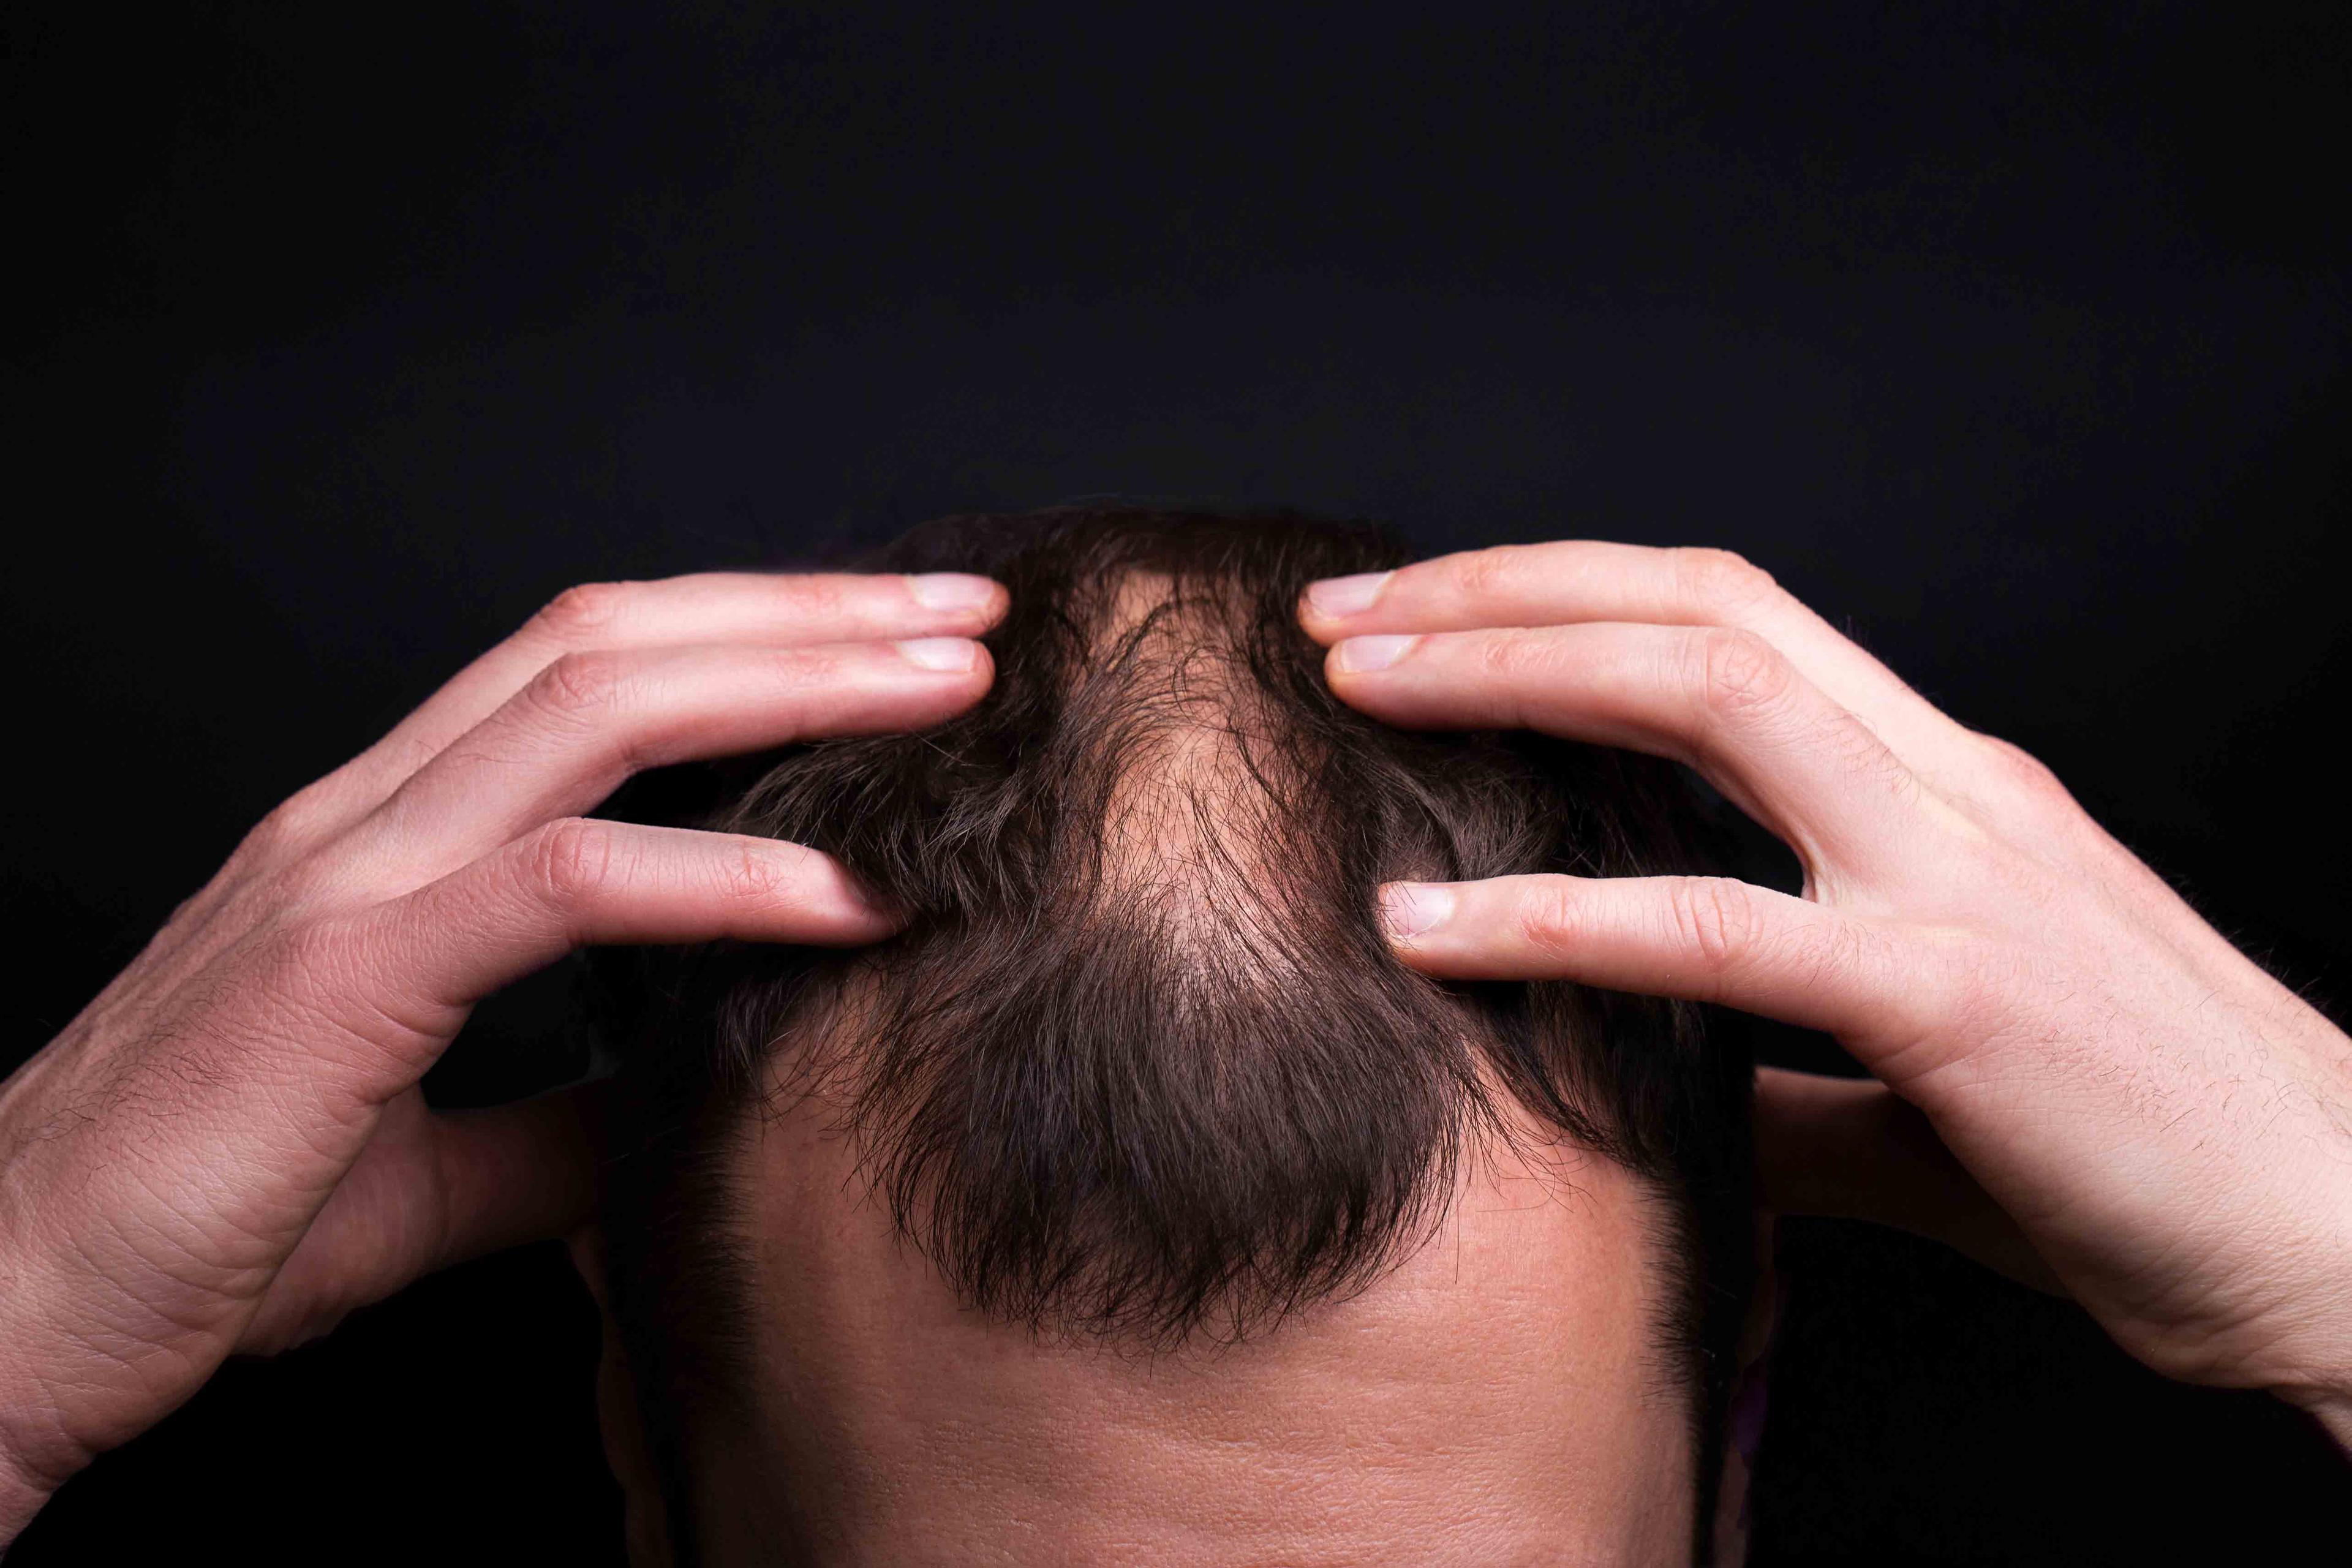 Young brunette man photographed from above touching his scalp with both hands. A small bald spot has developed in the centre of his head that is characteristic of androgenetic alopecia.